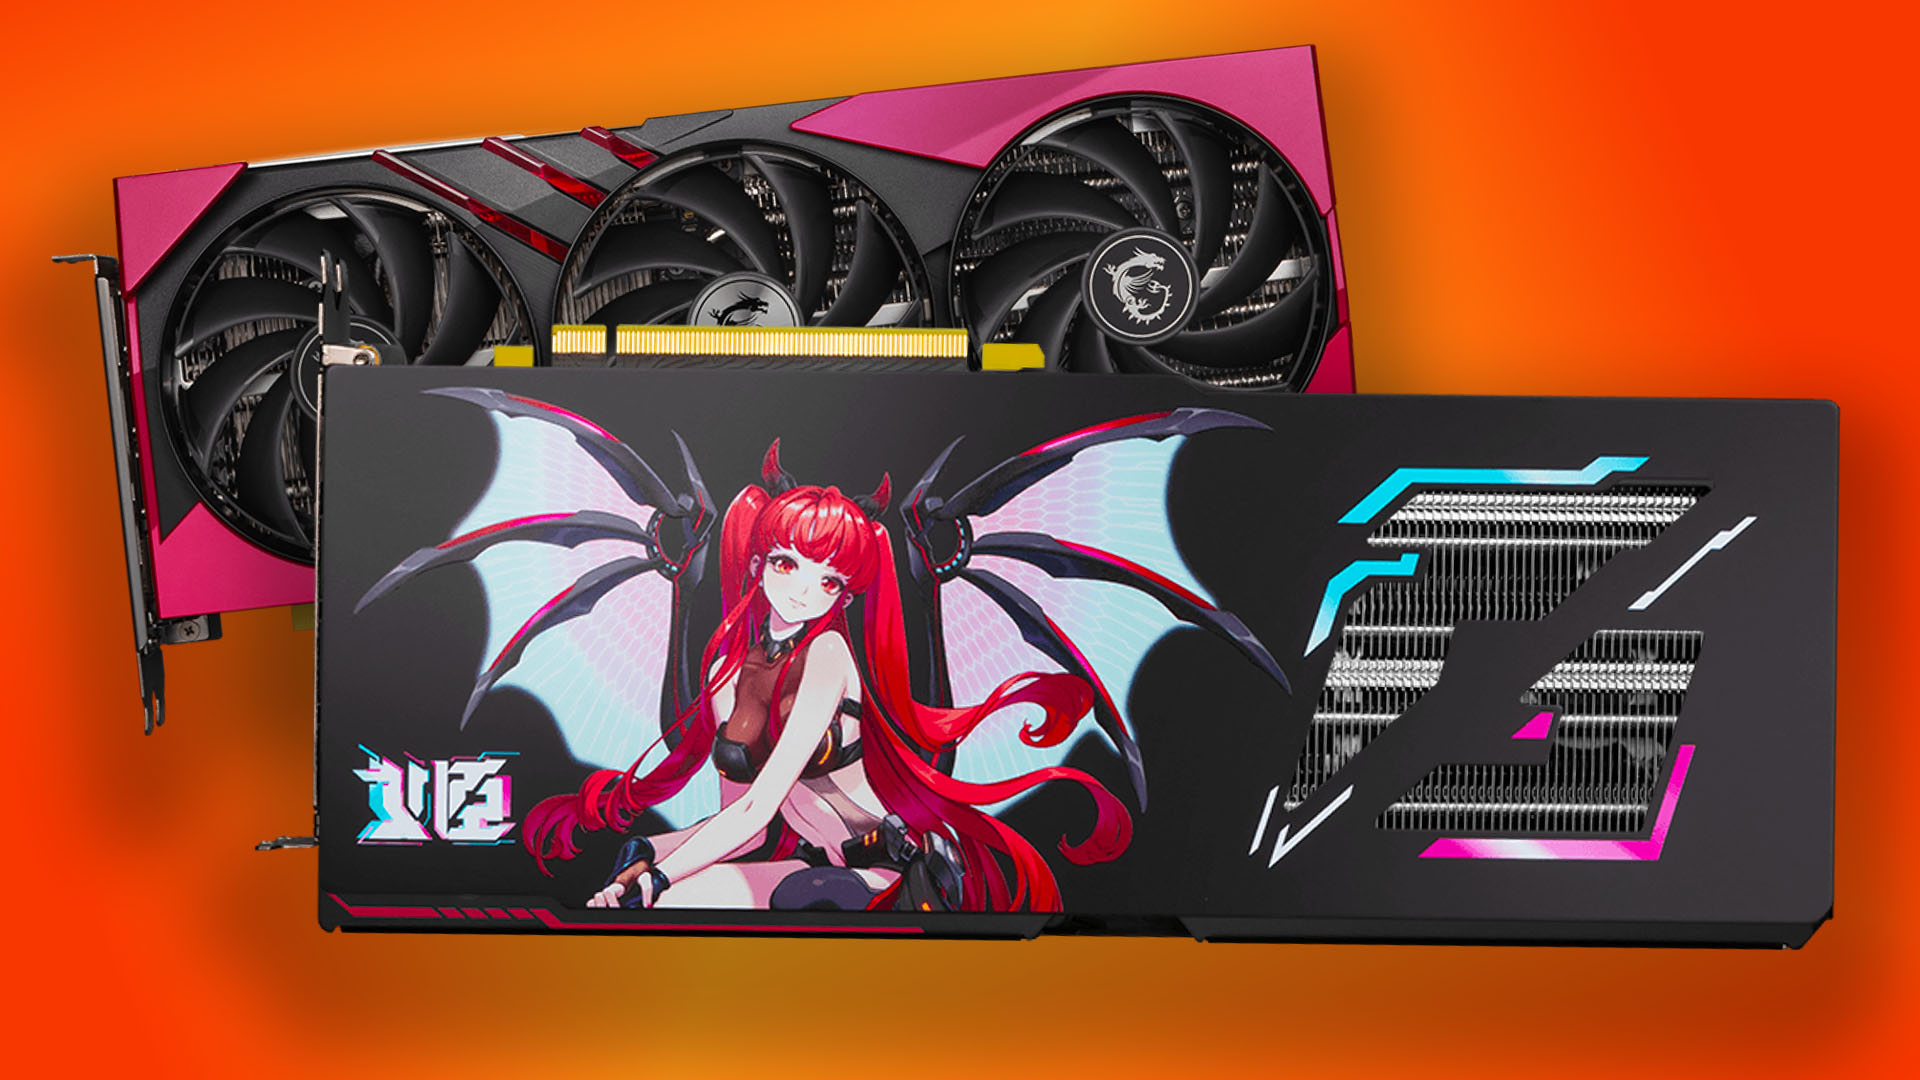 This slimline graphics card from MSI is an anime lover's dream